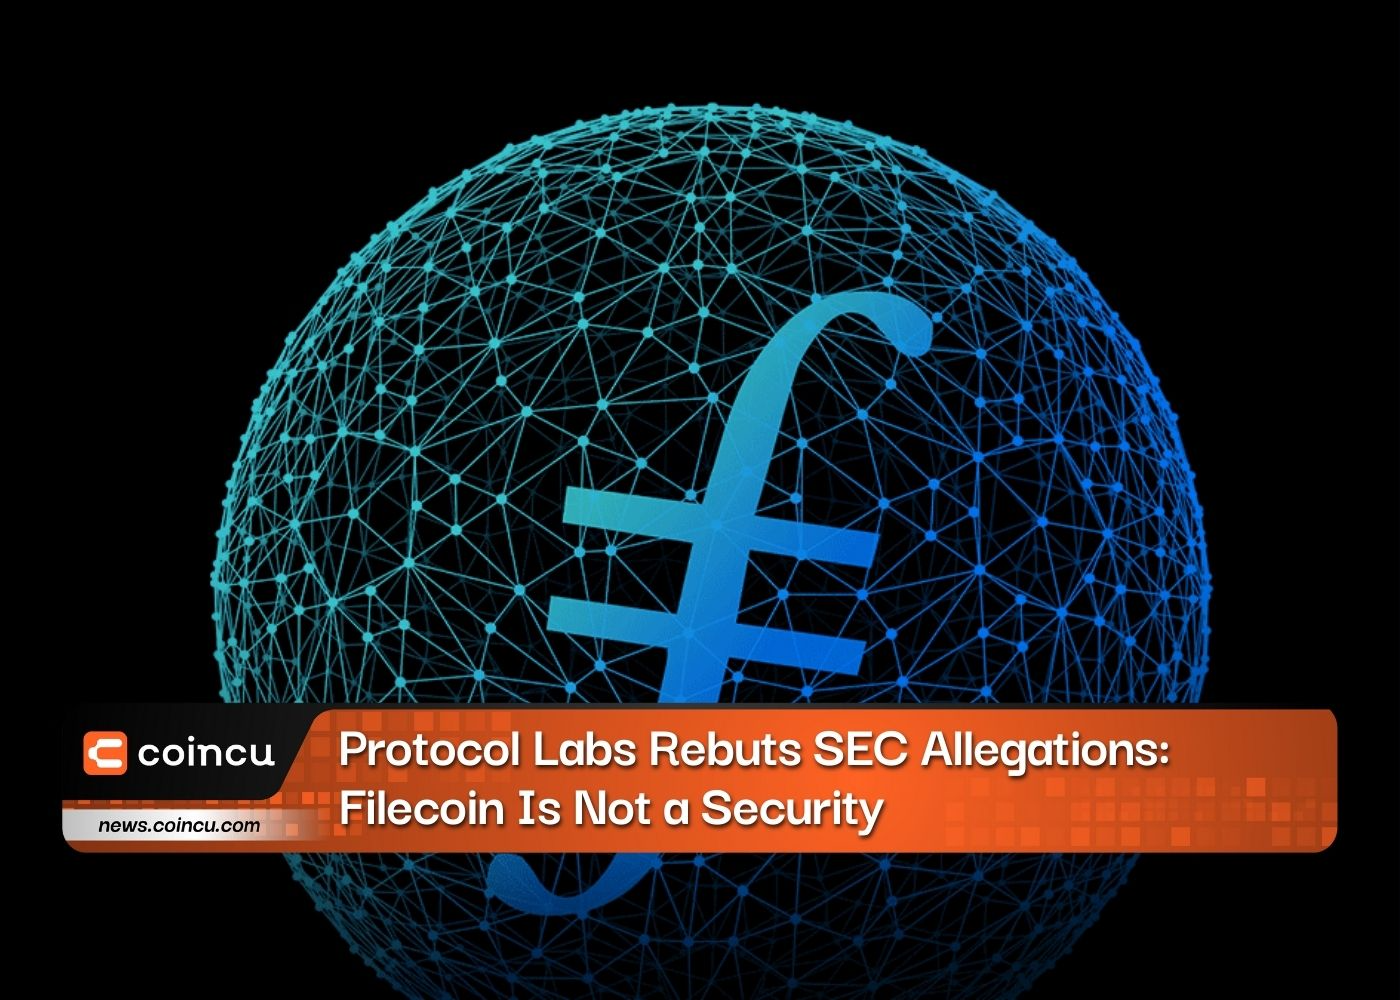 Protocol Labs Rebuts SEC Allegations: Filecoin Is Not a Security